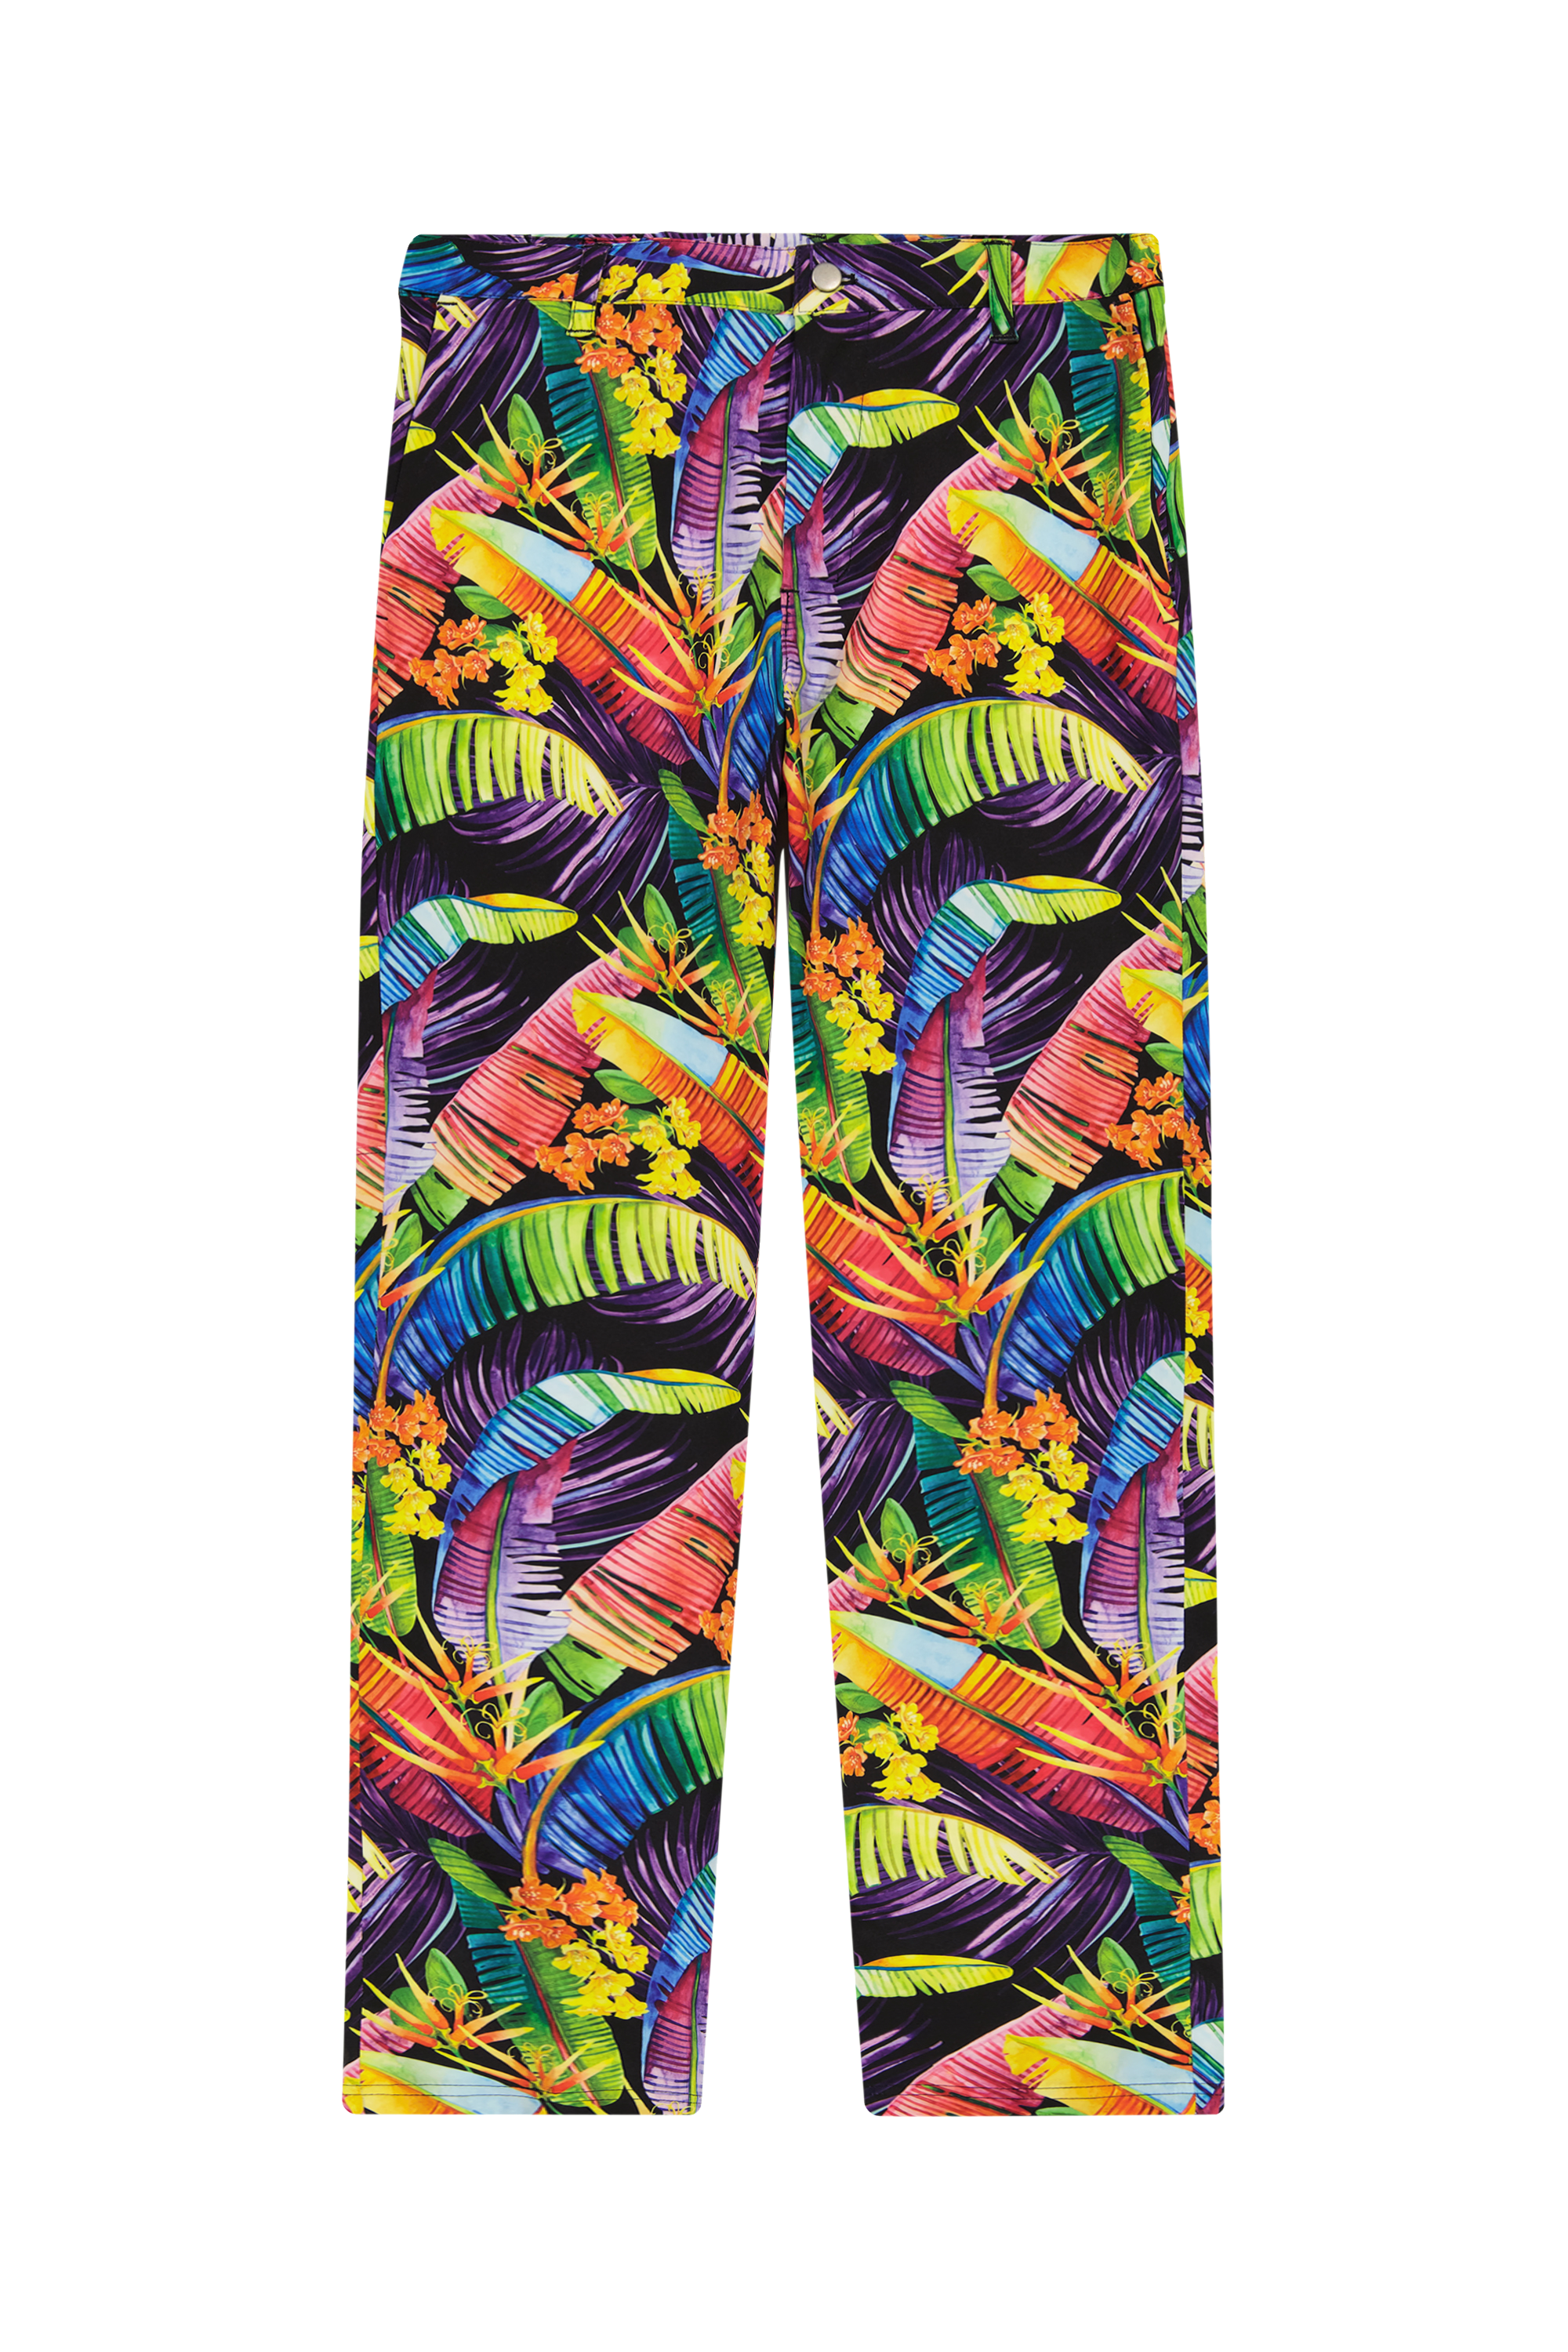 Mens Golf Pants Funky Funny Loud  Crazy Patterns by Royal  Awesome